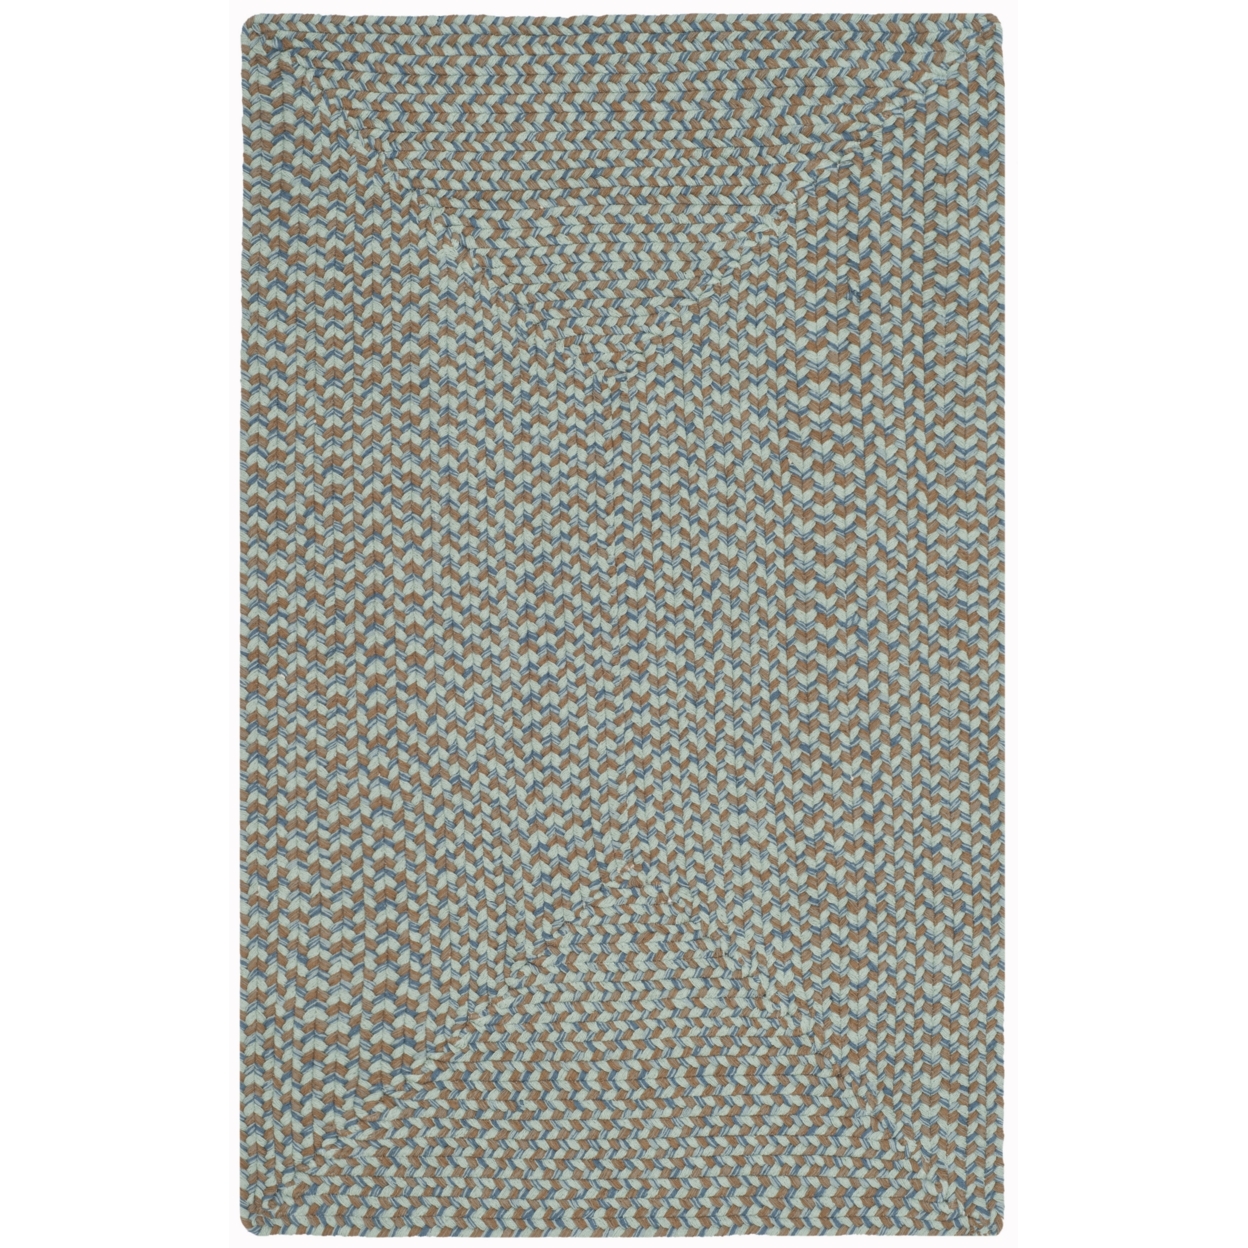 SAFAVIEH Braided Collection BRD170A Handwoven Multi Rug - 2' 6 X 4'